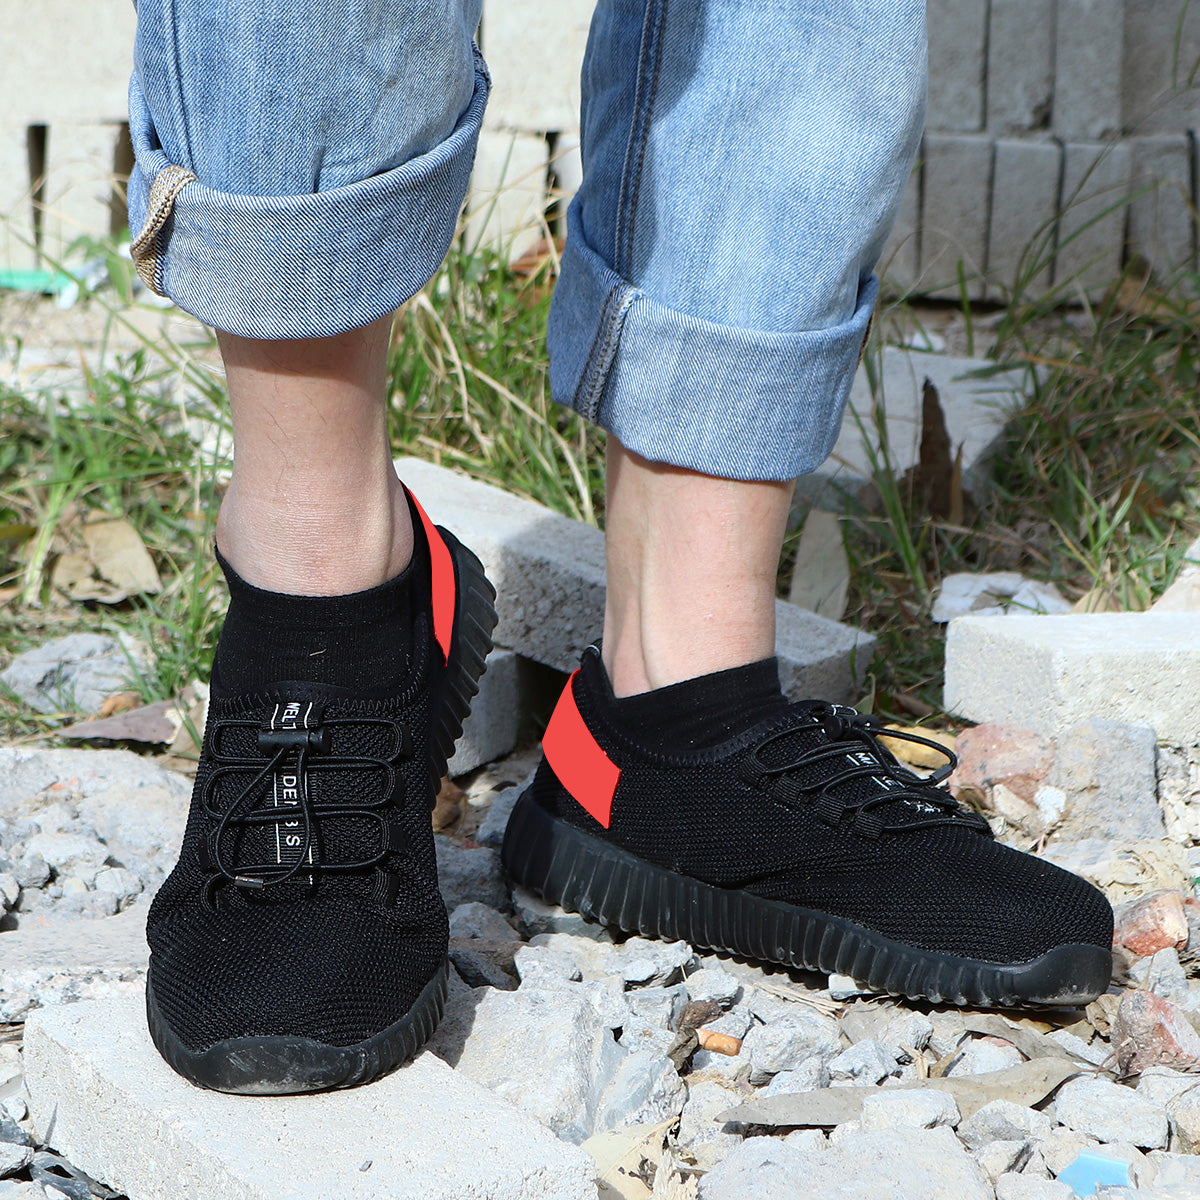 sneaker style safety shoes